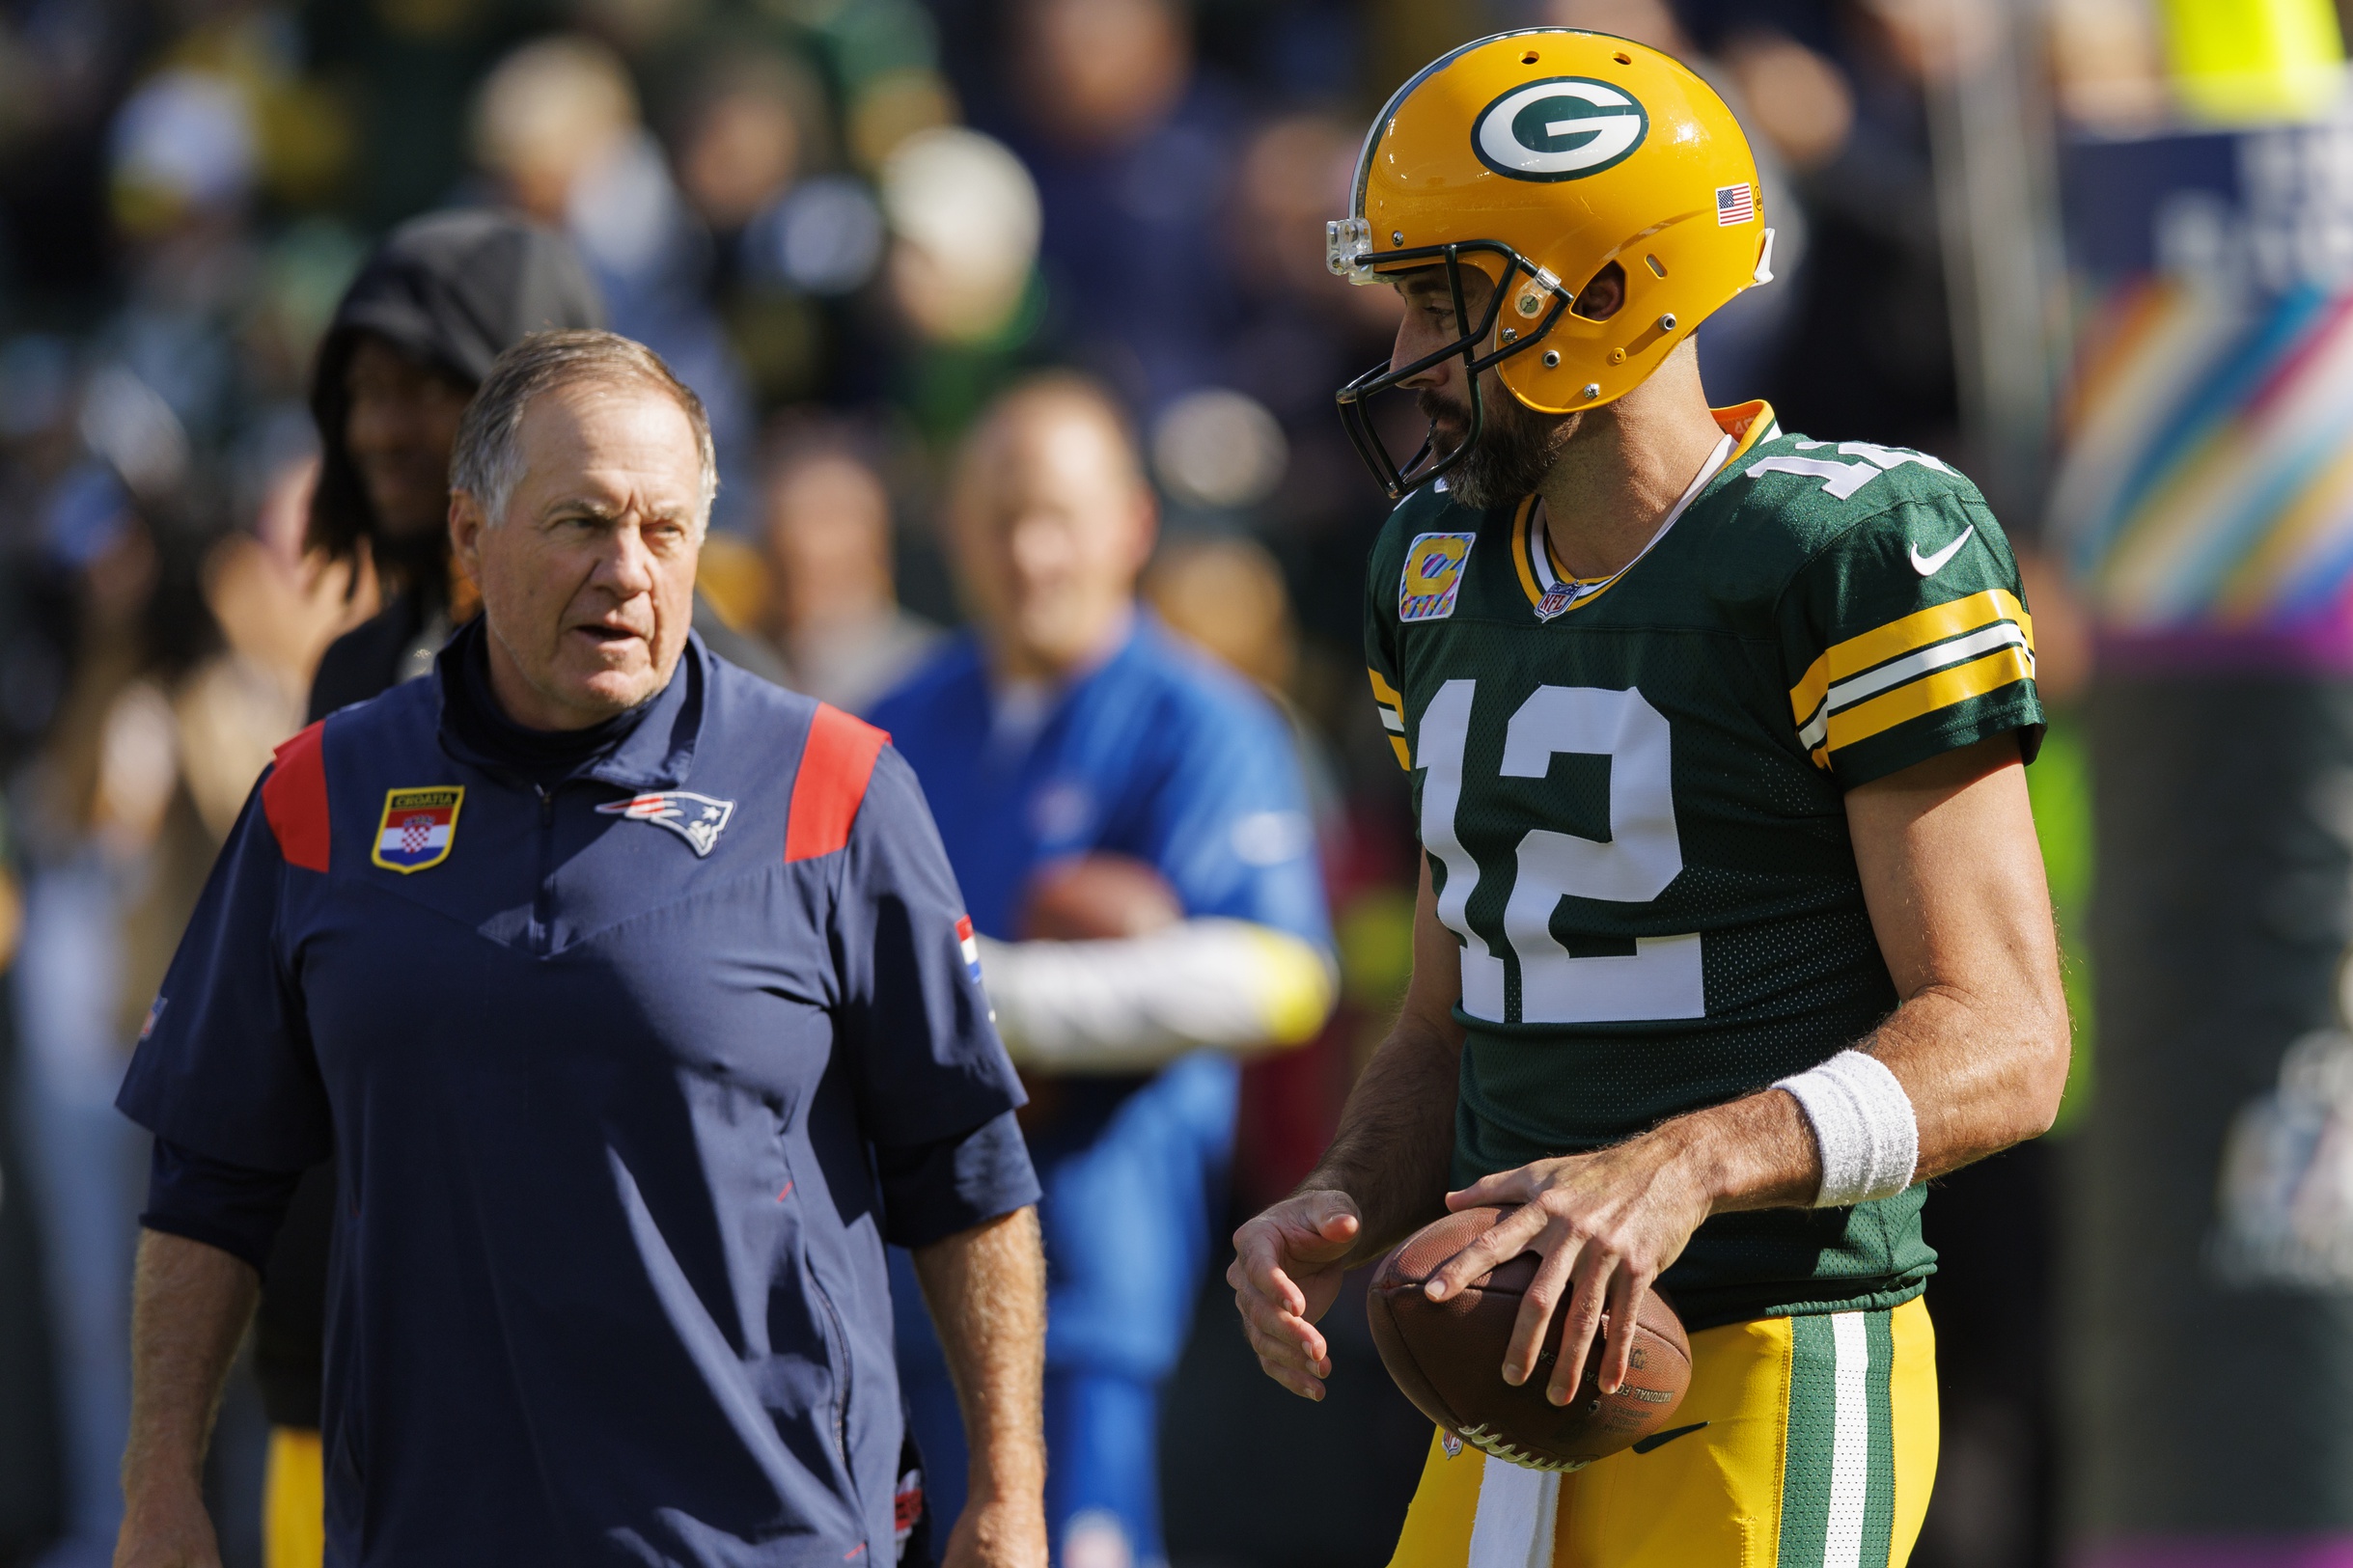 Oct 2, 2022; Green Bay, Wisconsin, USA; Green Bay Packers quarterback Aaron Rodgers (12) talks with New England Patriots head coach Bill Belichick during warmups prior to the game at Lambeau Field. Mandatory Credit: Jeff Hanisch-USA TODAY Sports